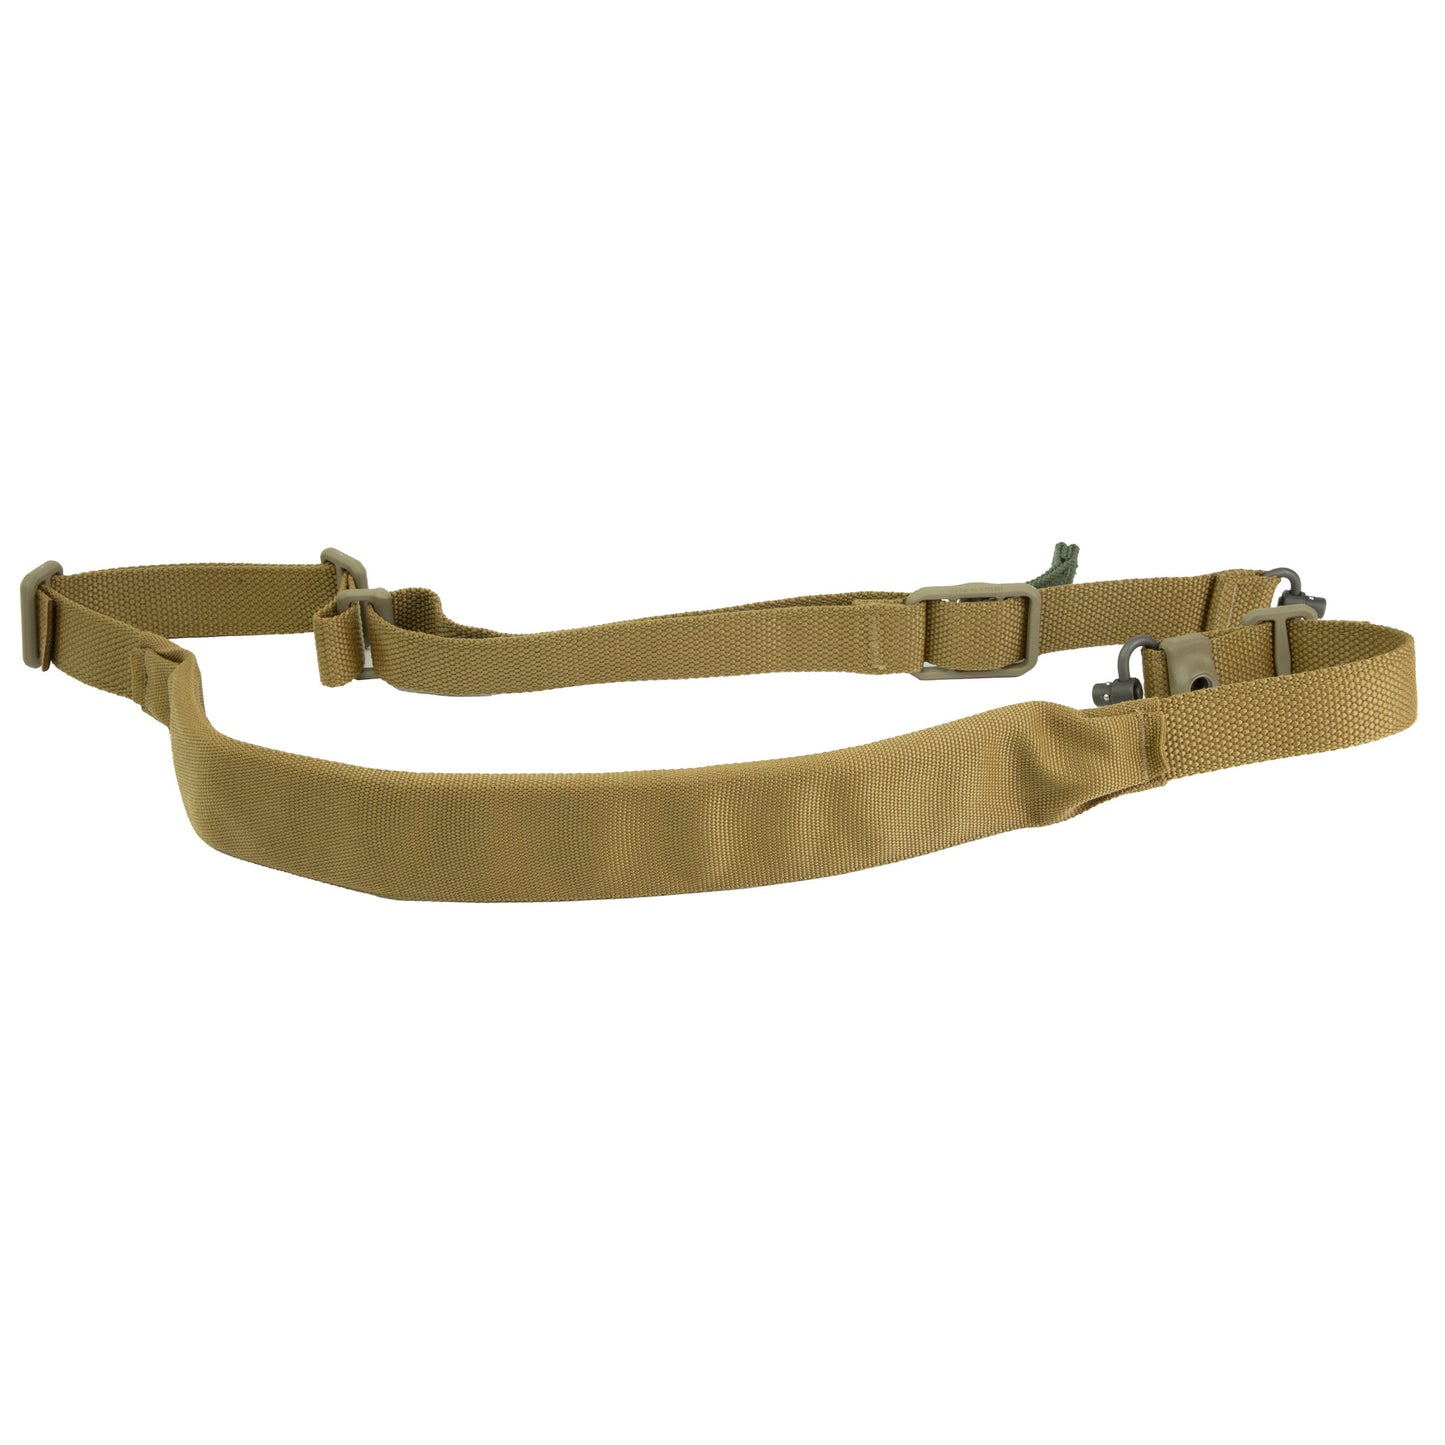 Blue Force Gear, Sling, Coyote, 2-TO-1 POINT SLING